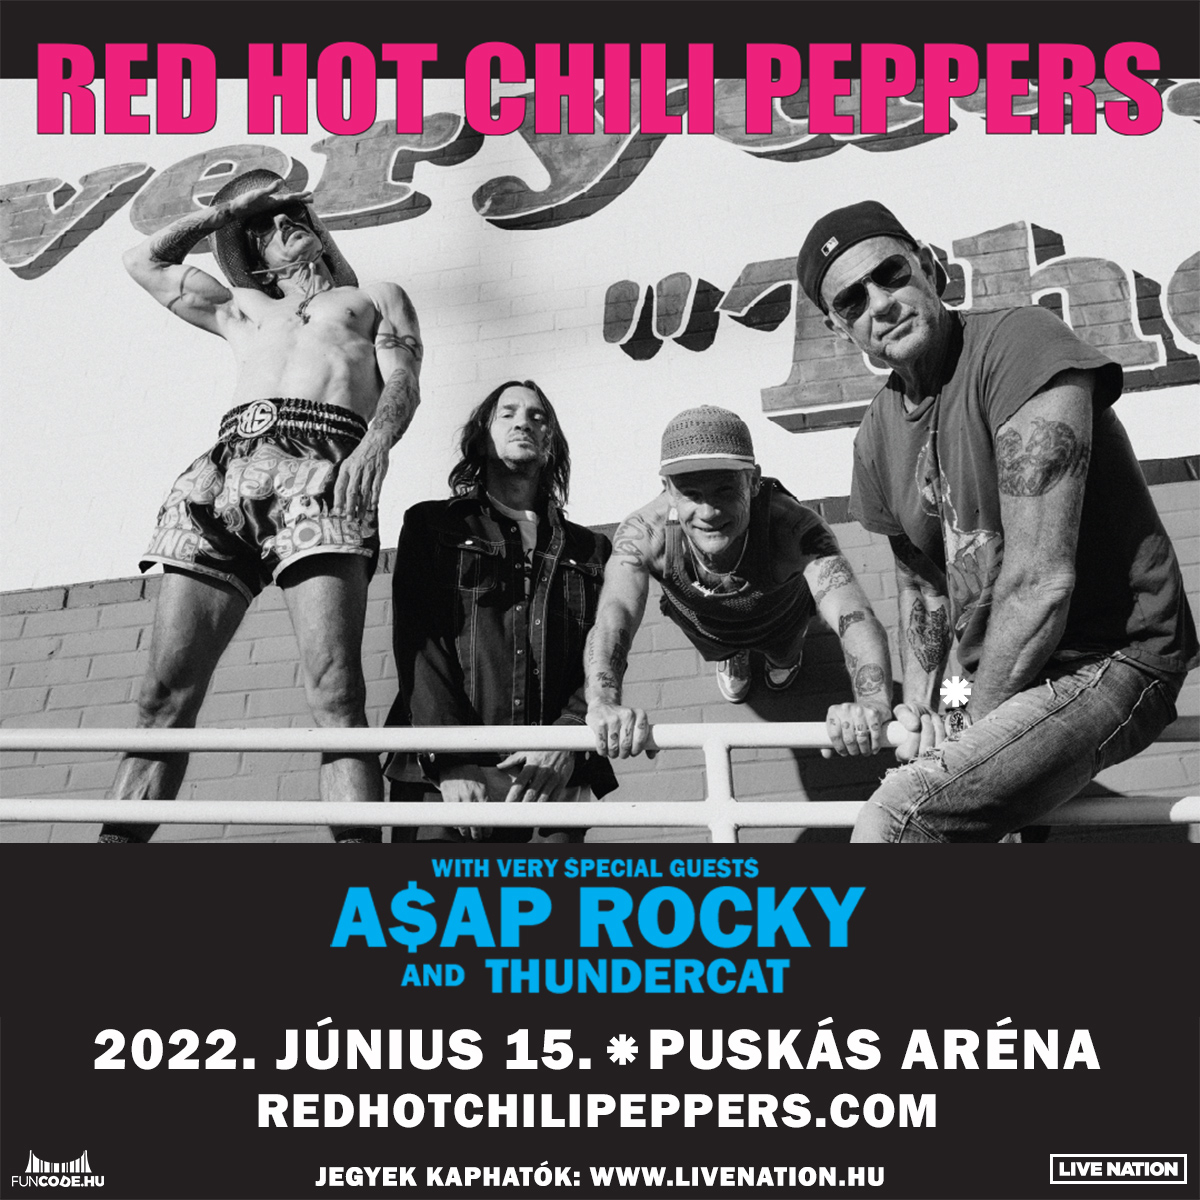 Red Hot Chili Peppers concert